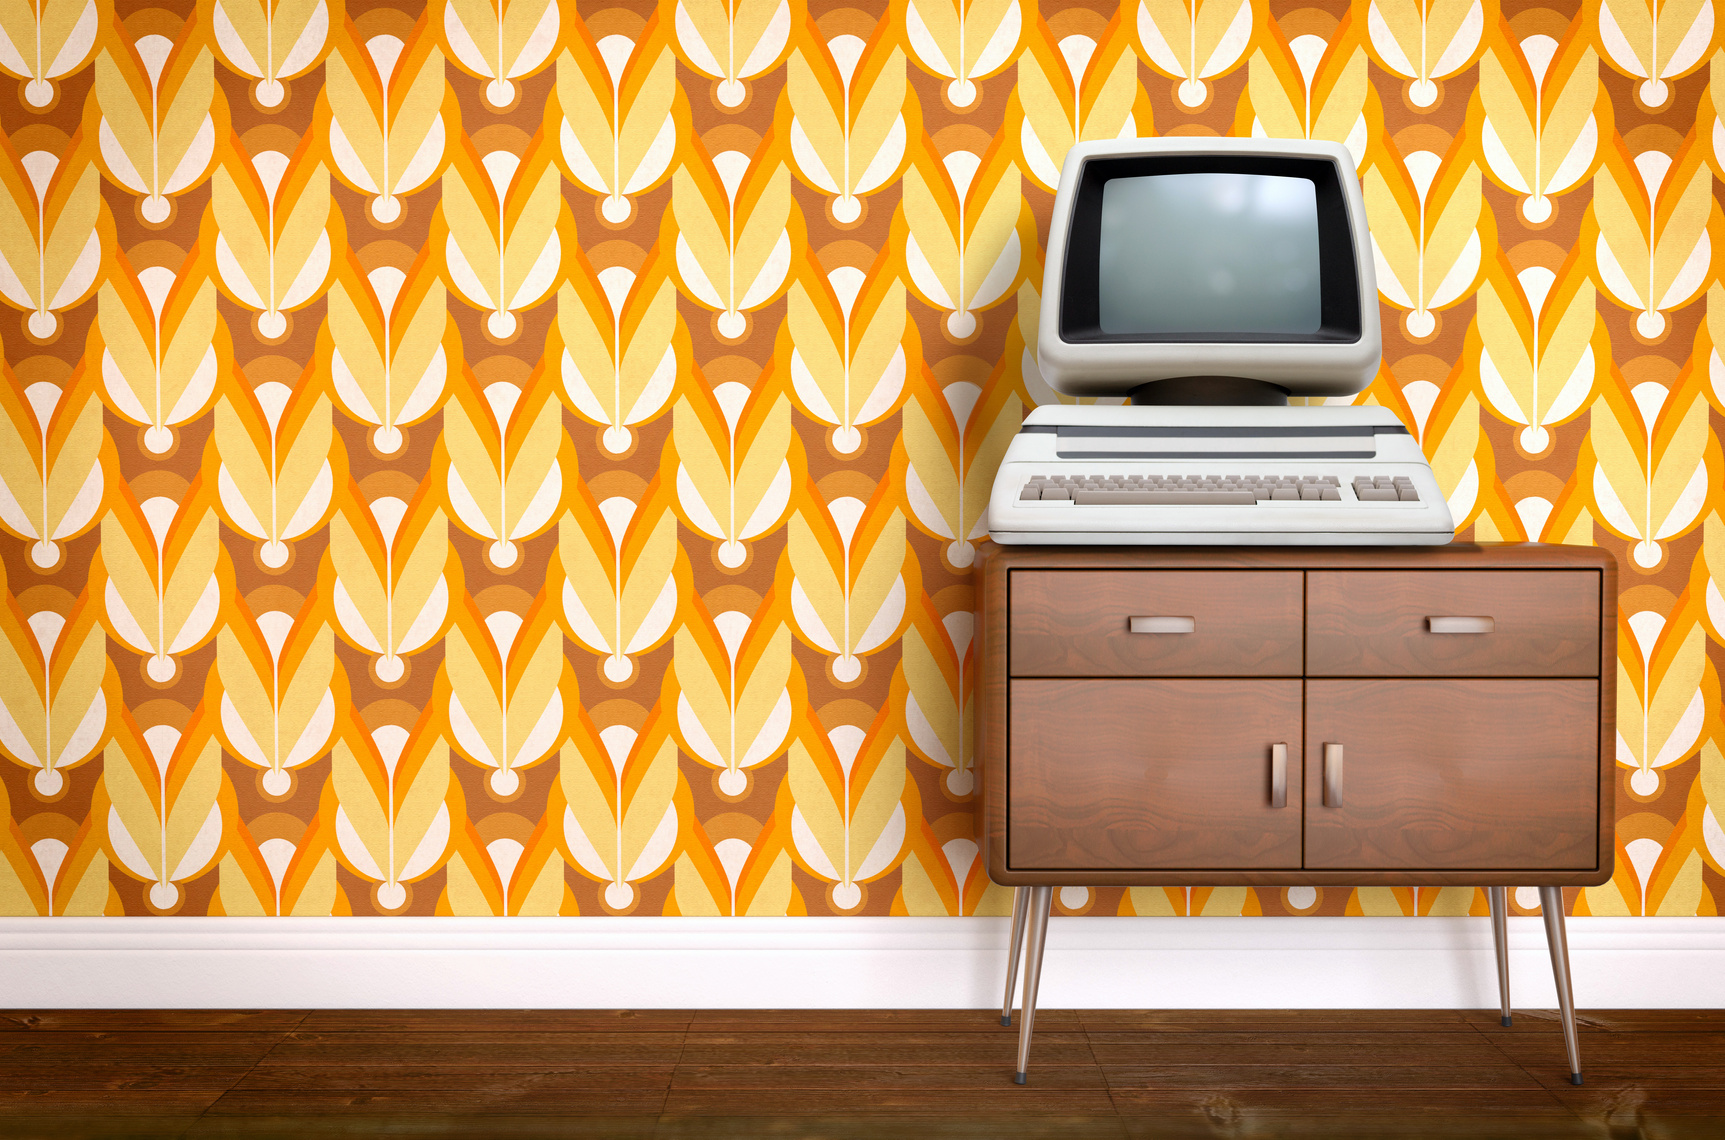 Vintage old computer on sixties, seventies wallpaper and furniture